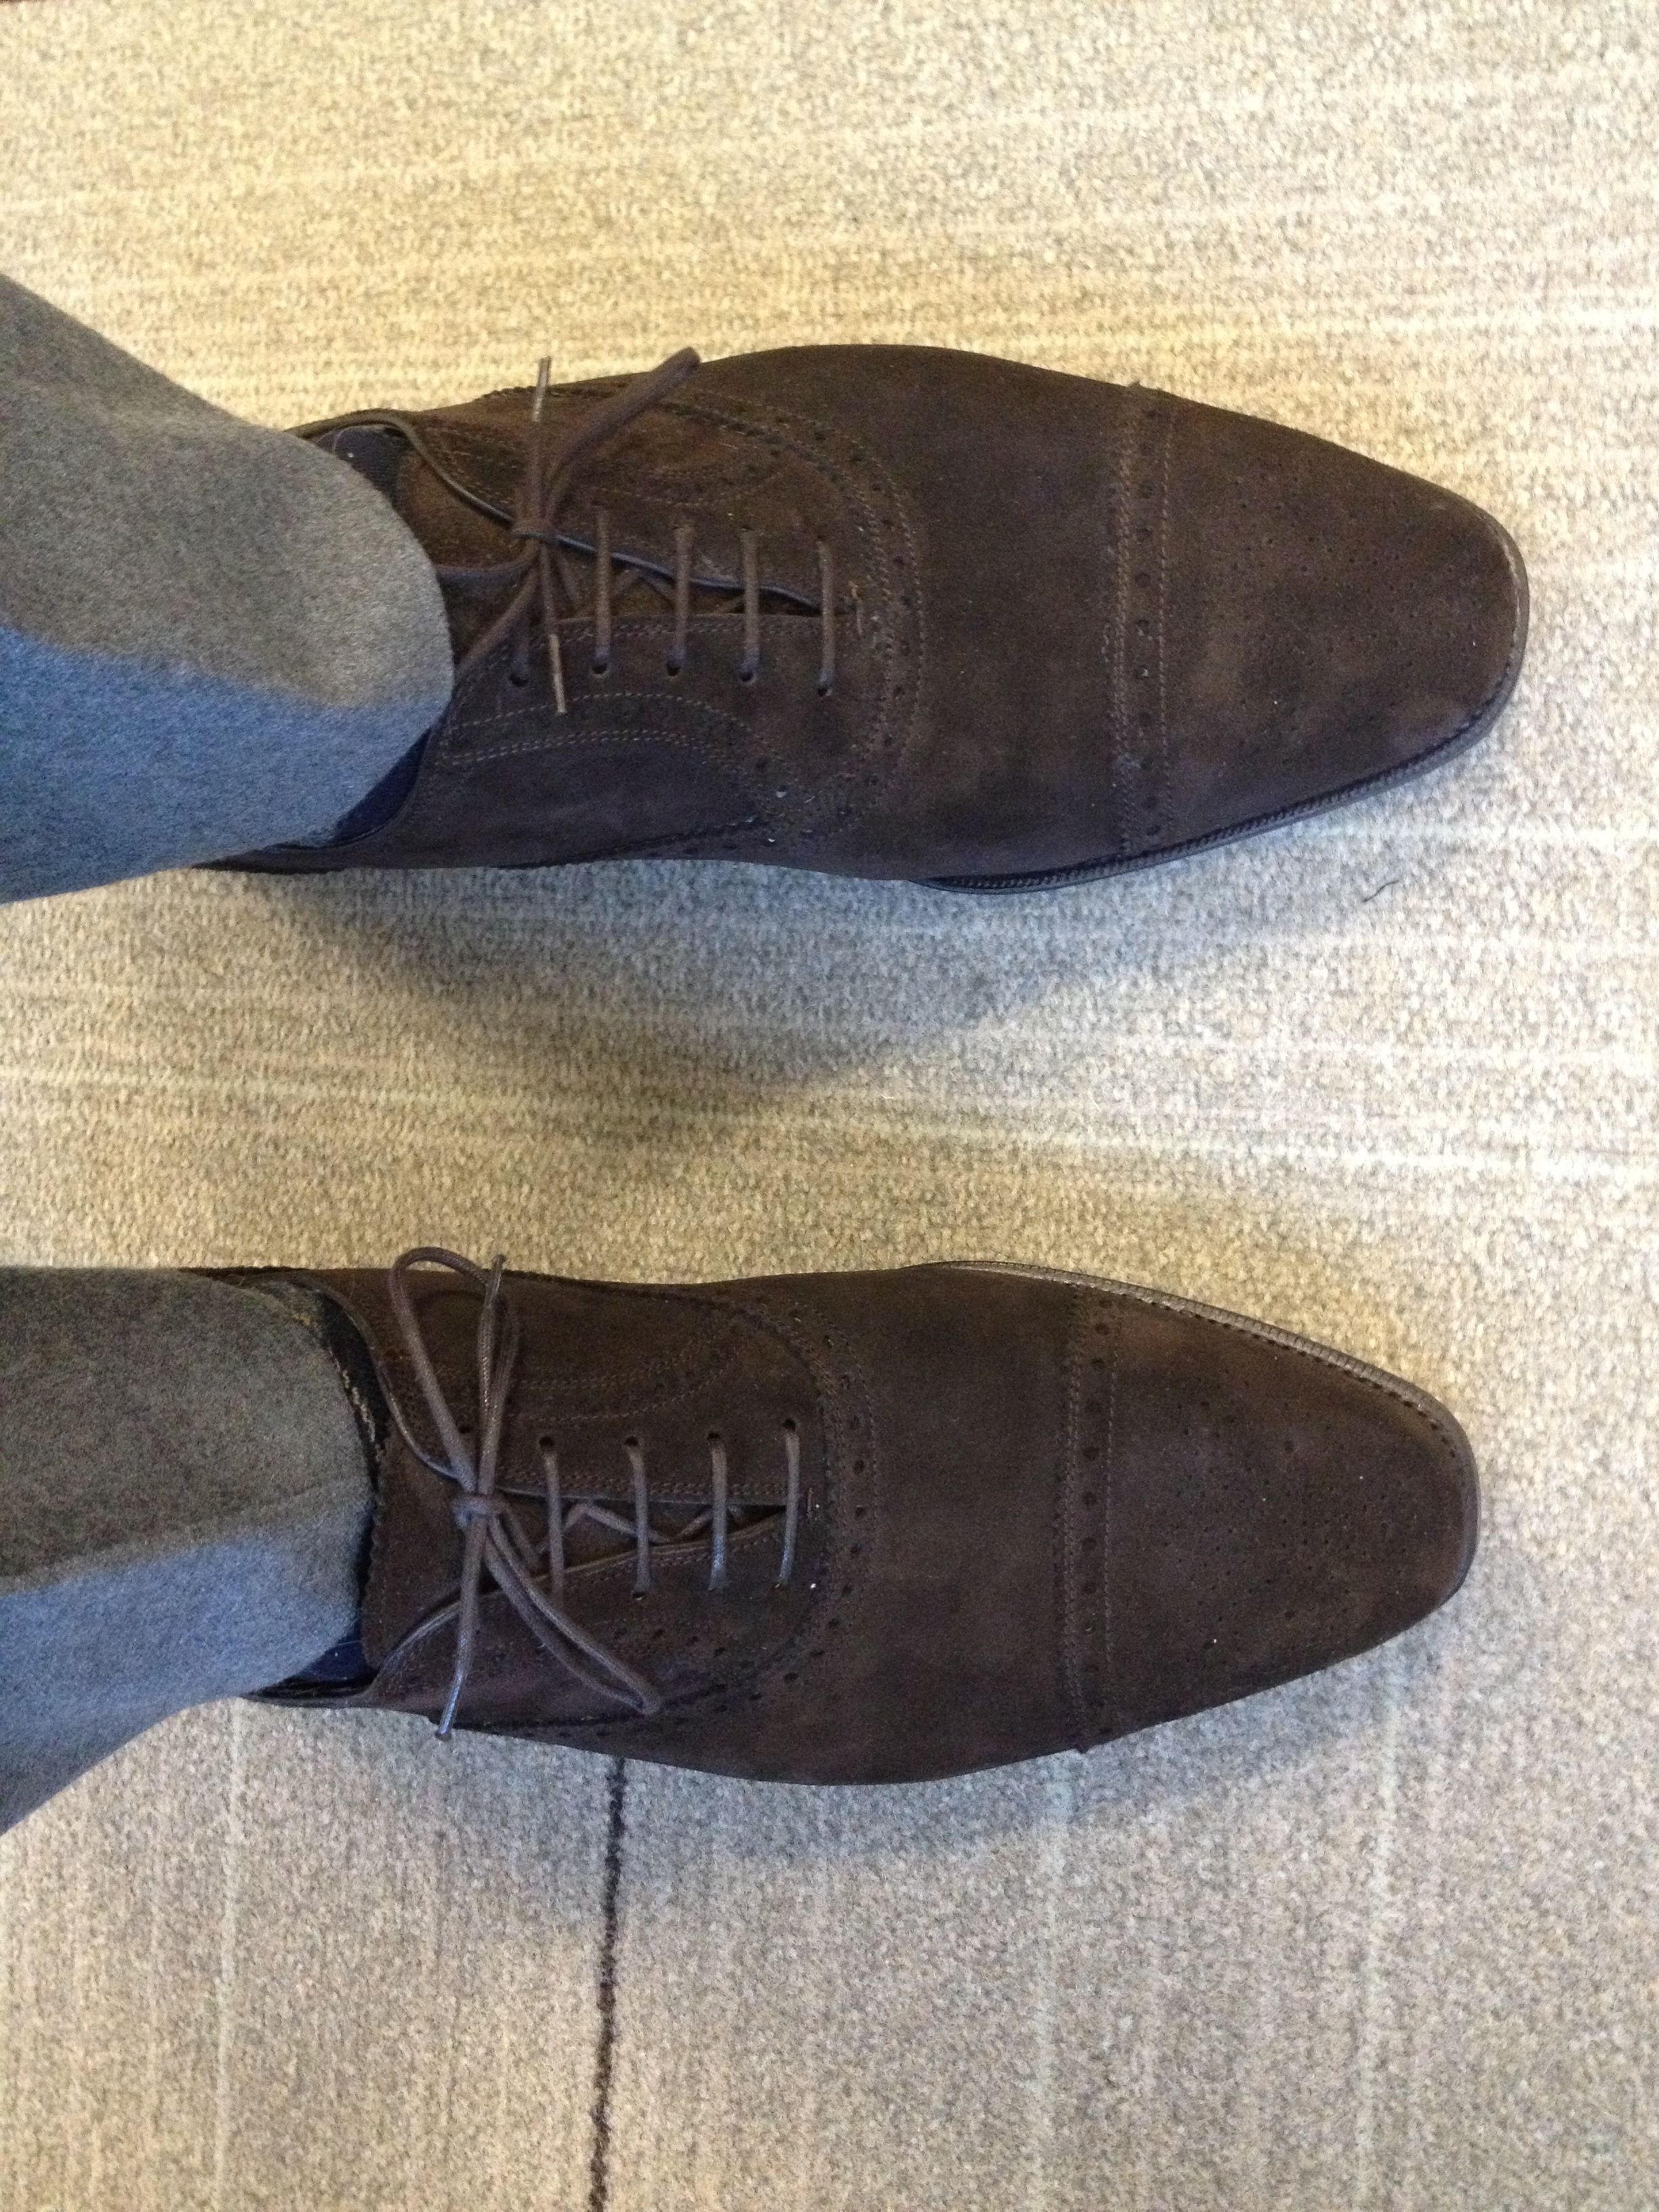 suede shoes - post 'em here! | Page 119 | Styleforum